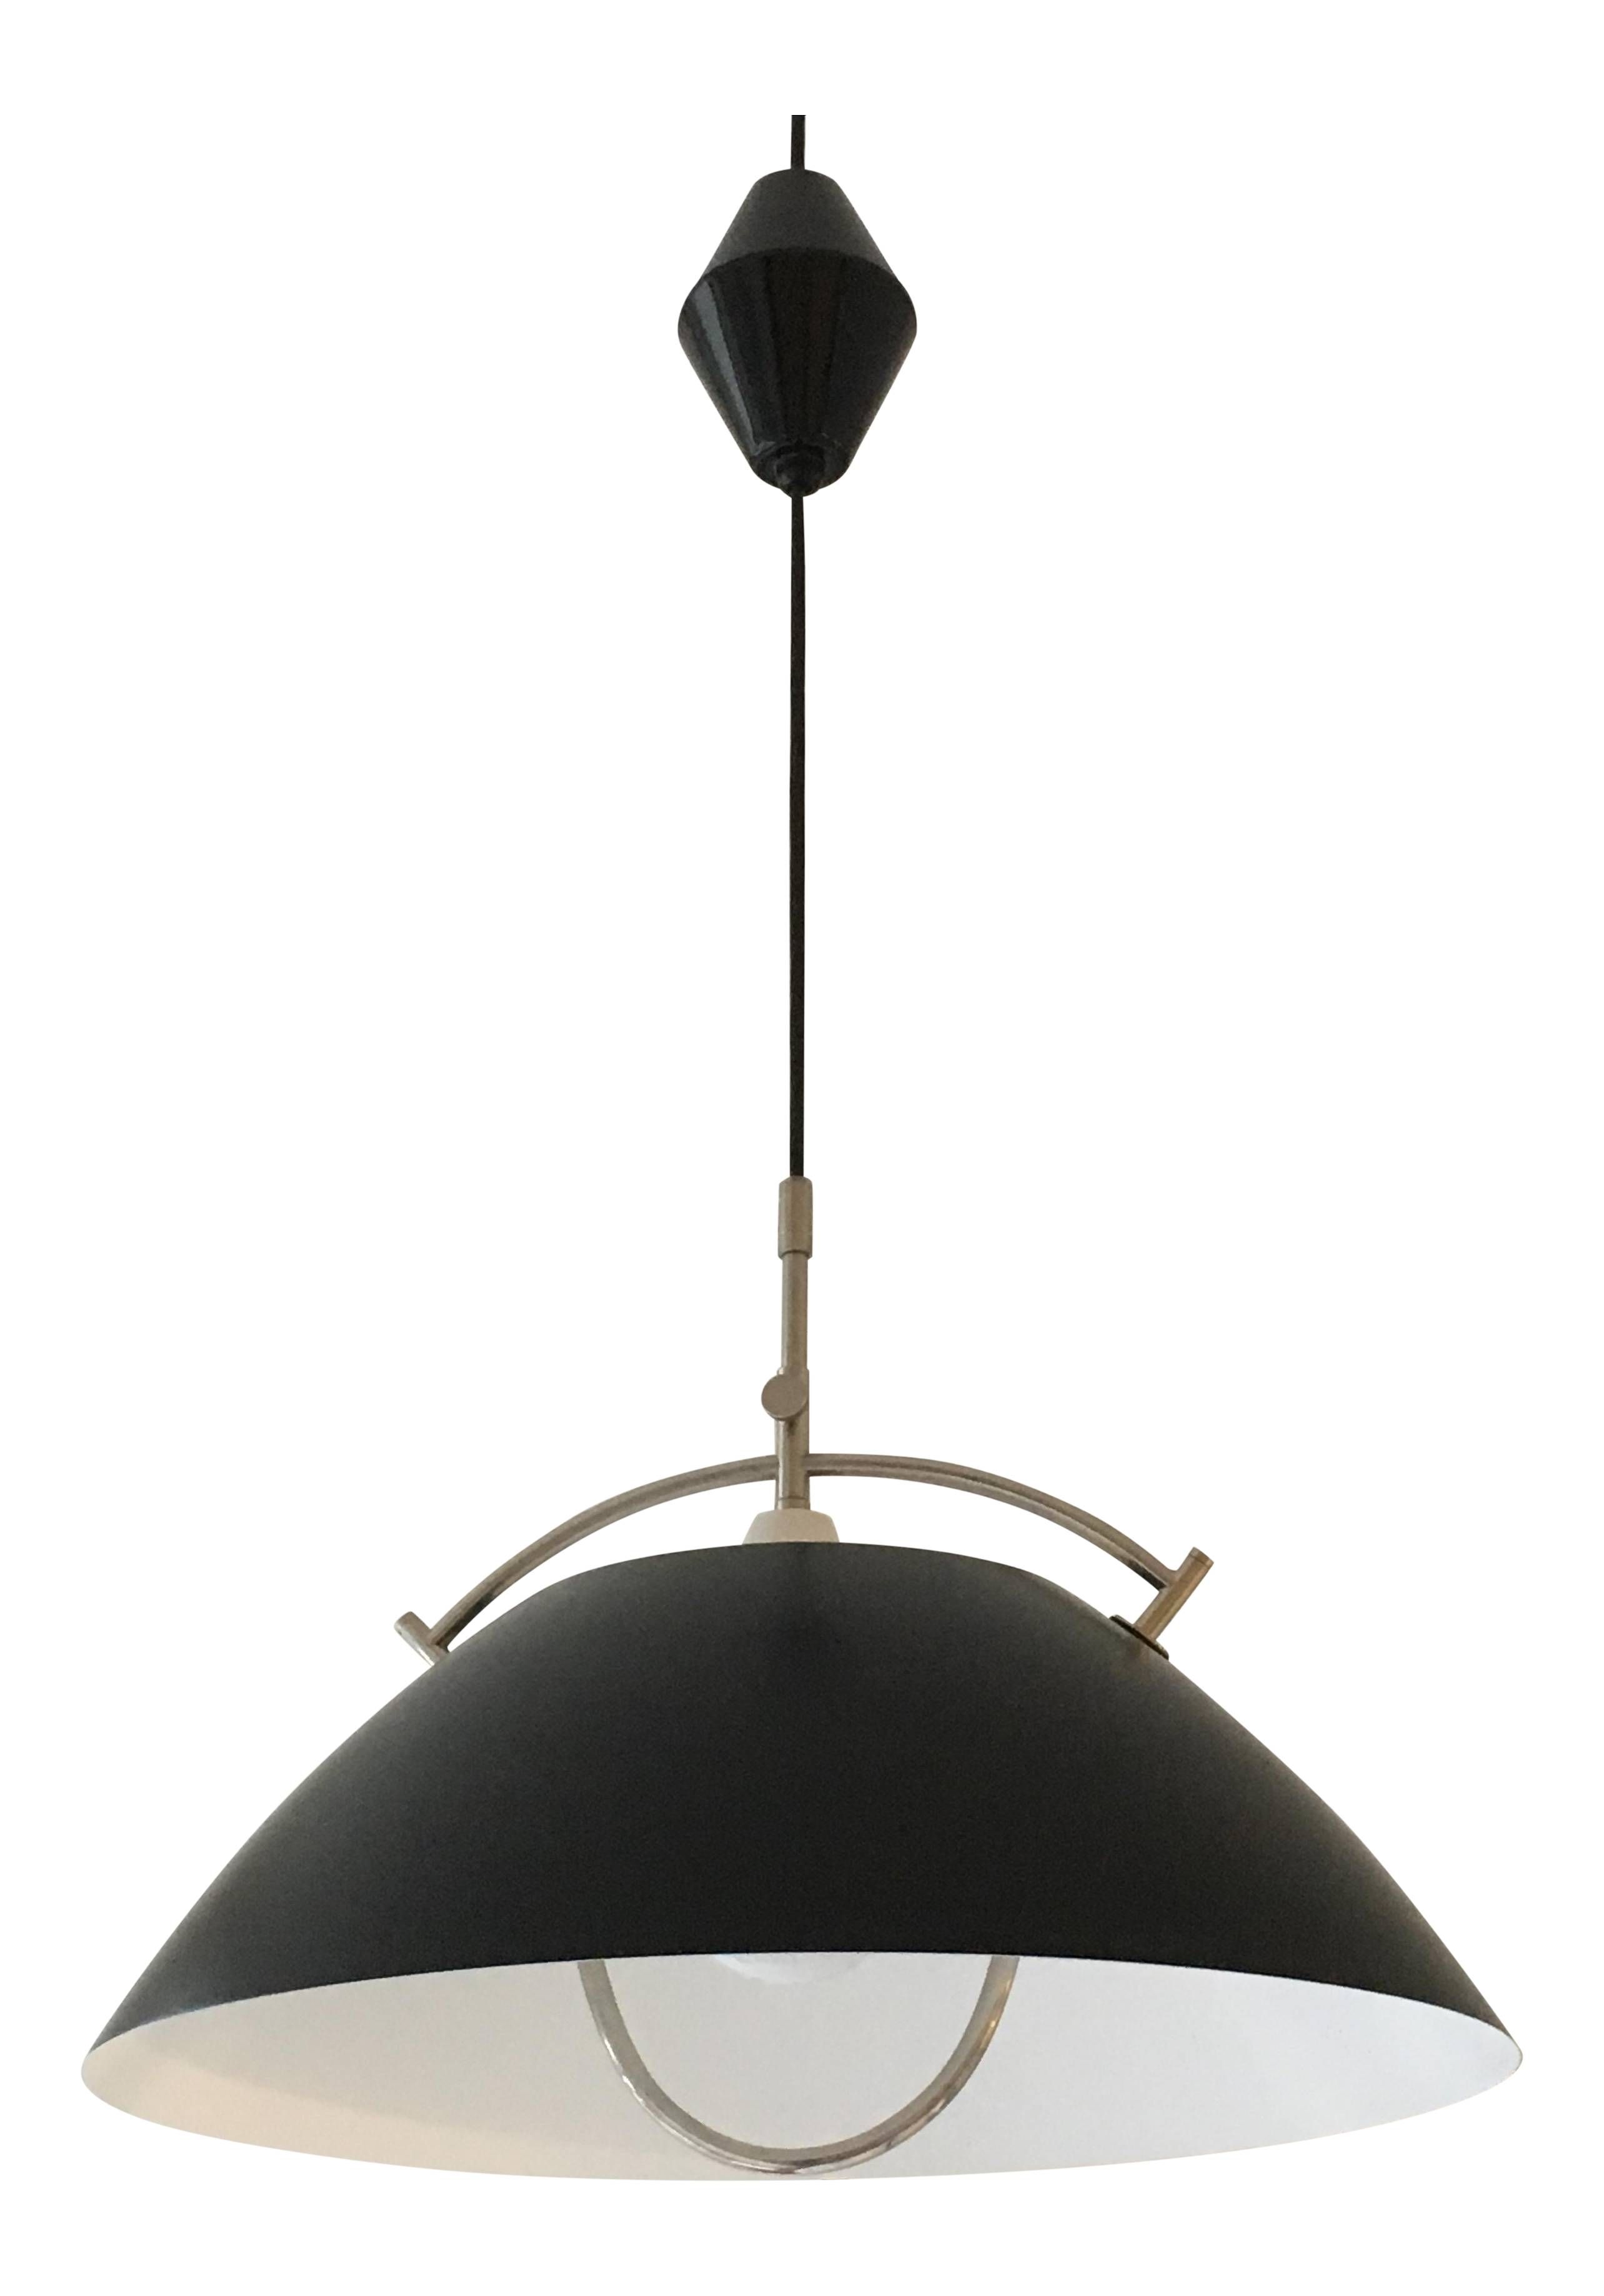 Awesome Retractable Ceiling Light 60 With Additional Led Ceiling Inside Retractable Lights Fixtures (View 3 of 15)